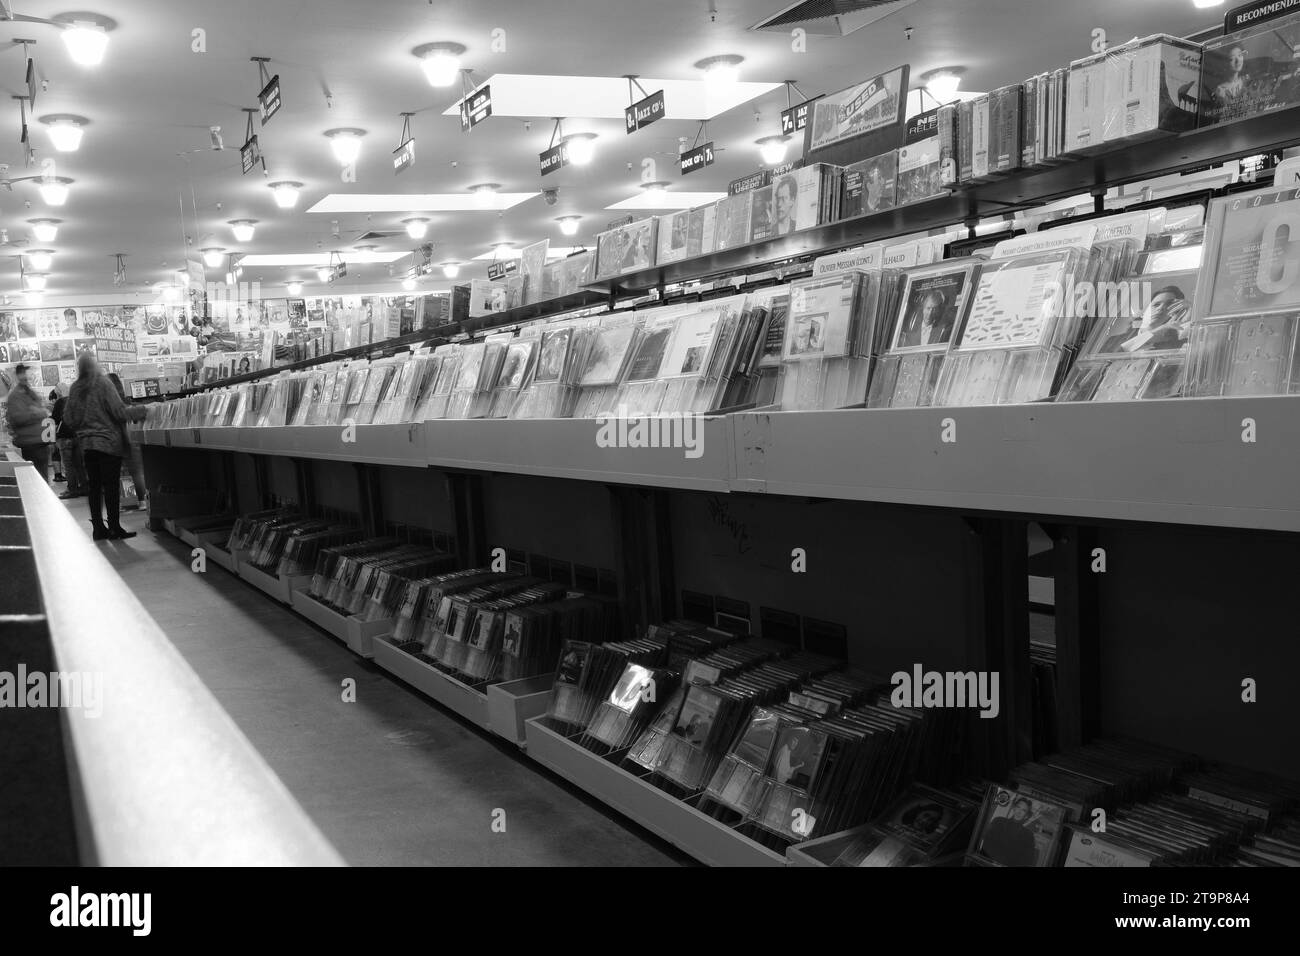 Aisle of used CDs at Amoeba Music in San Francisco, California; music shoppers in the distance at the end of the aisle; monochrome black and white. Stock Photo